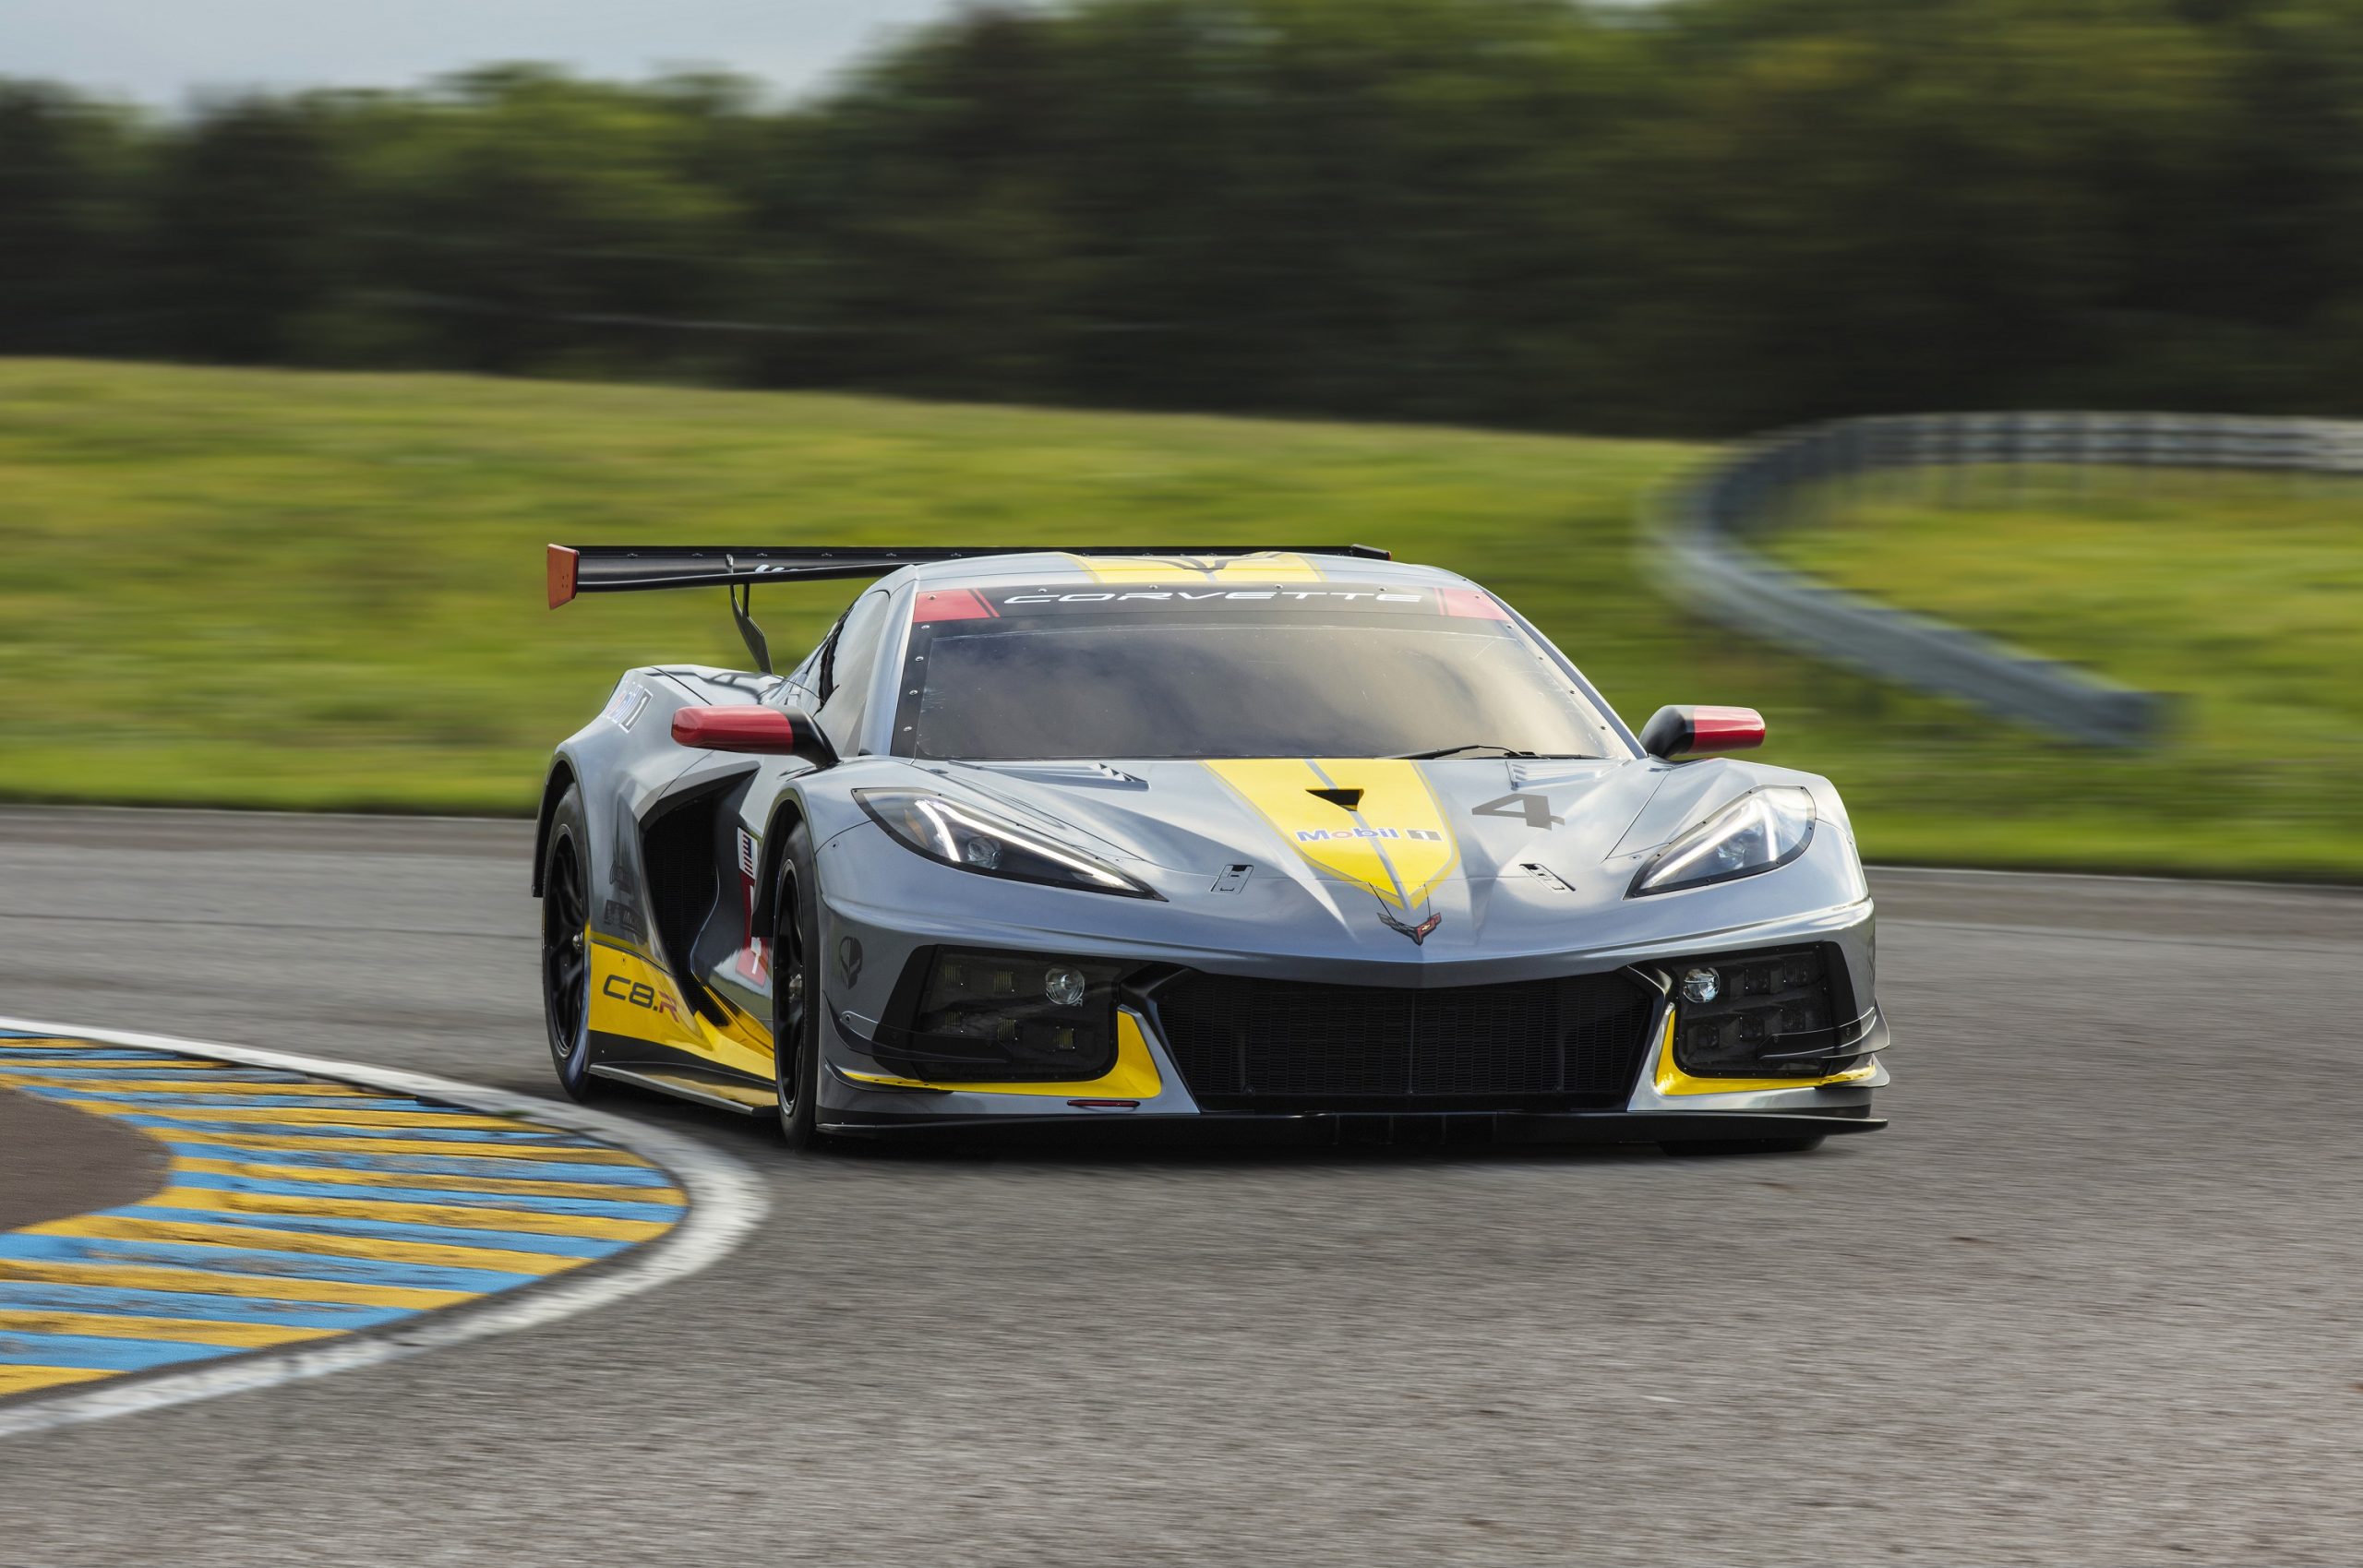 The grey and yellow Chevrolet C8.R racing car on track shot from the 3/4 angle